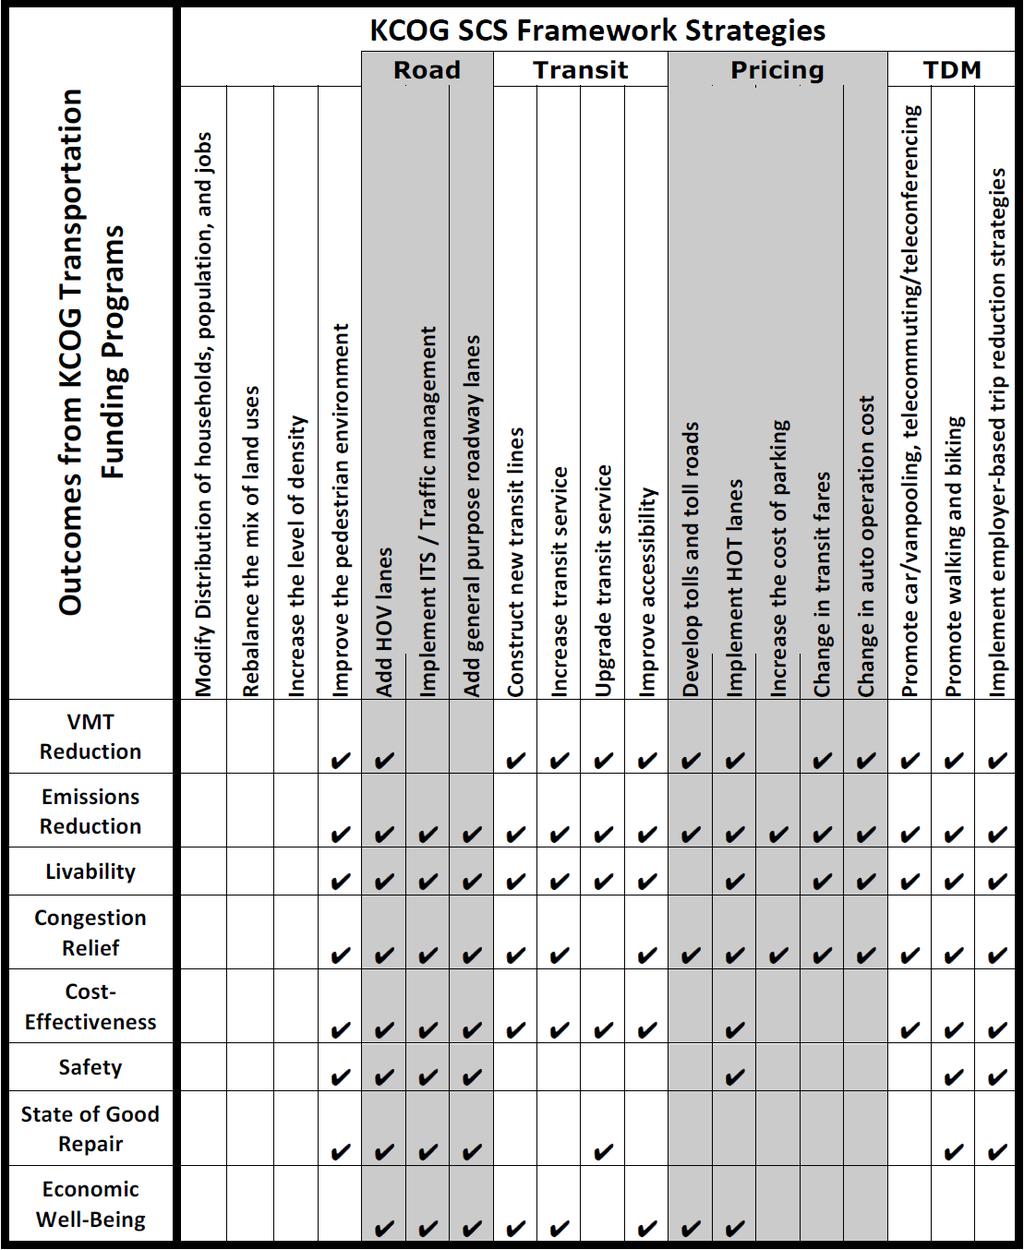 CHAPTER 4 SUSTAINABLE COMMUNITIES STRATEGY Table 4-9 illustrates the consistency between the project selection criteria outcomes from the various Kern COG funding programs with the Kern COG SCS